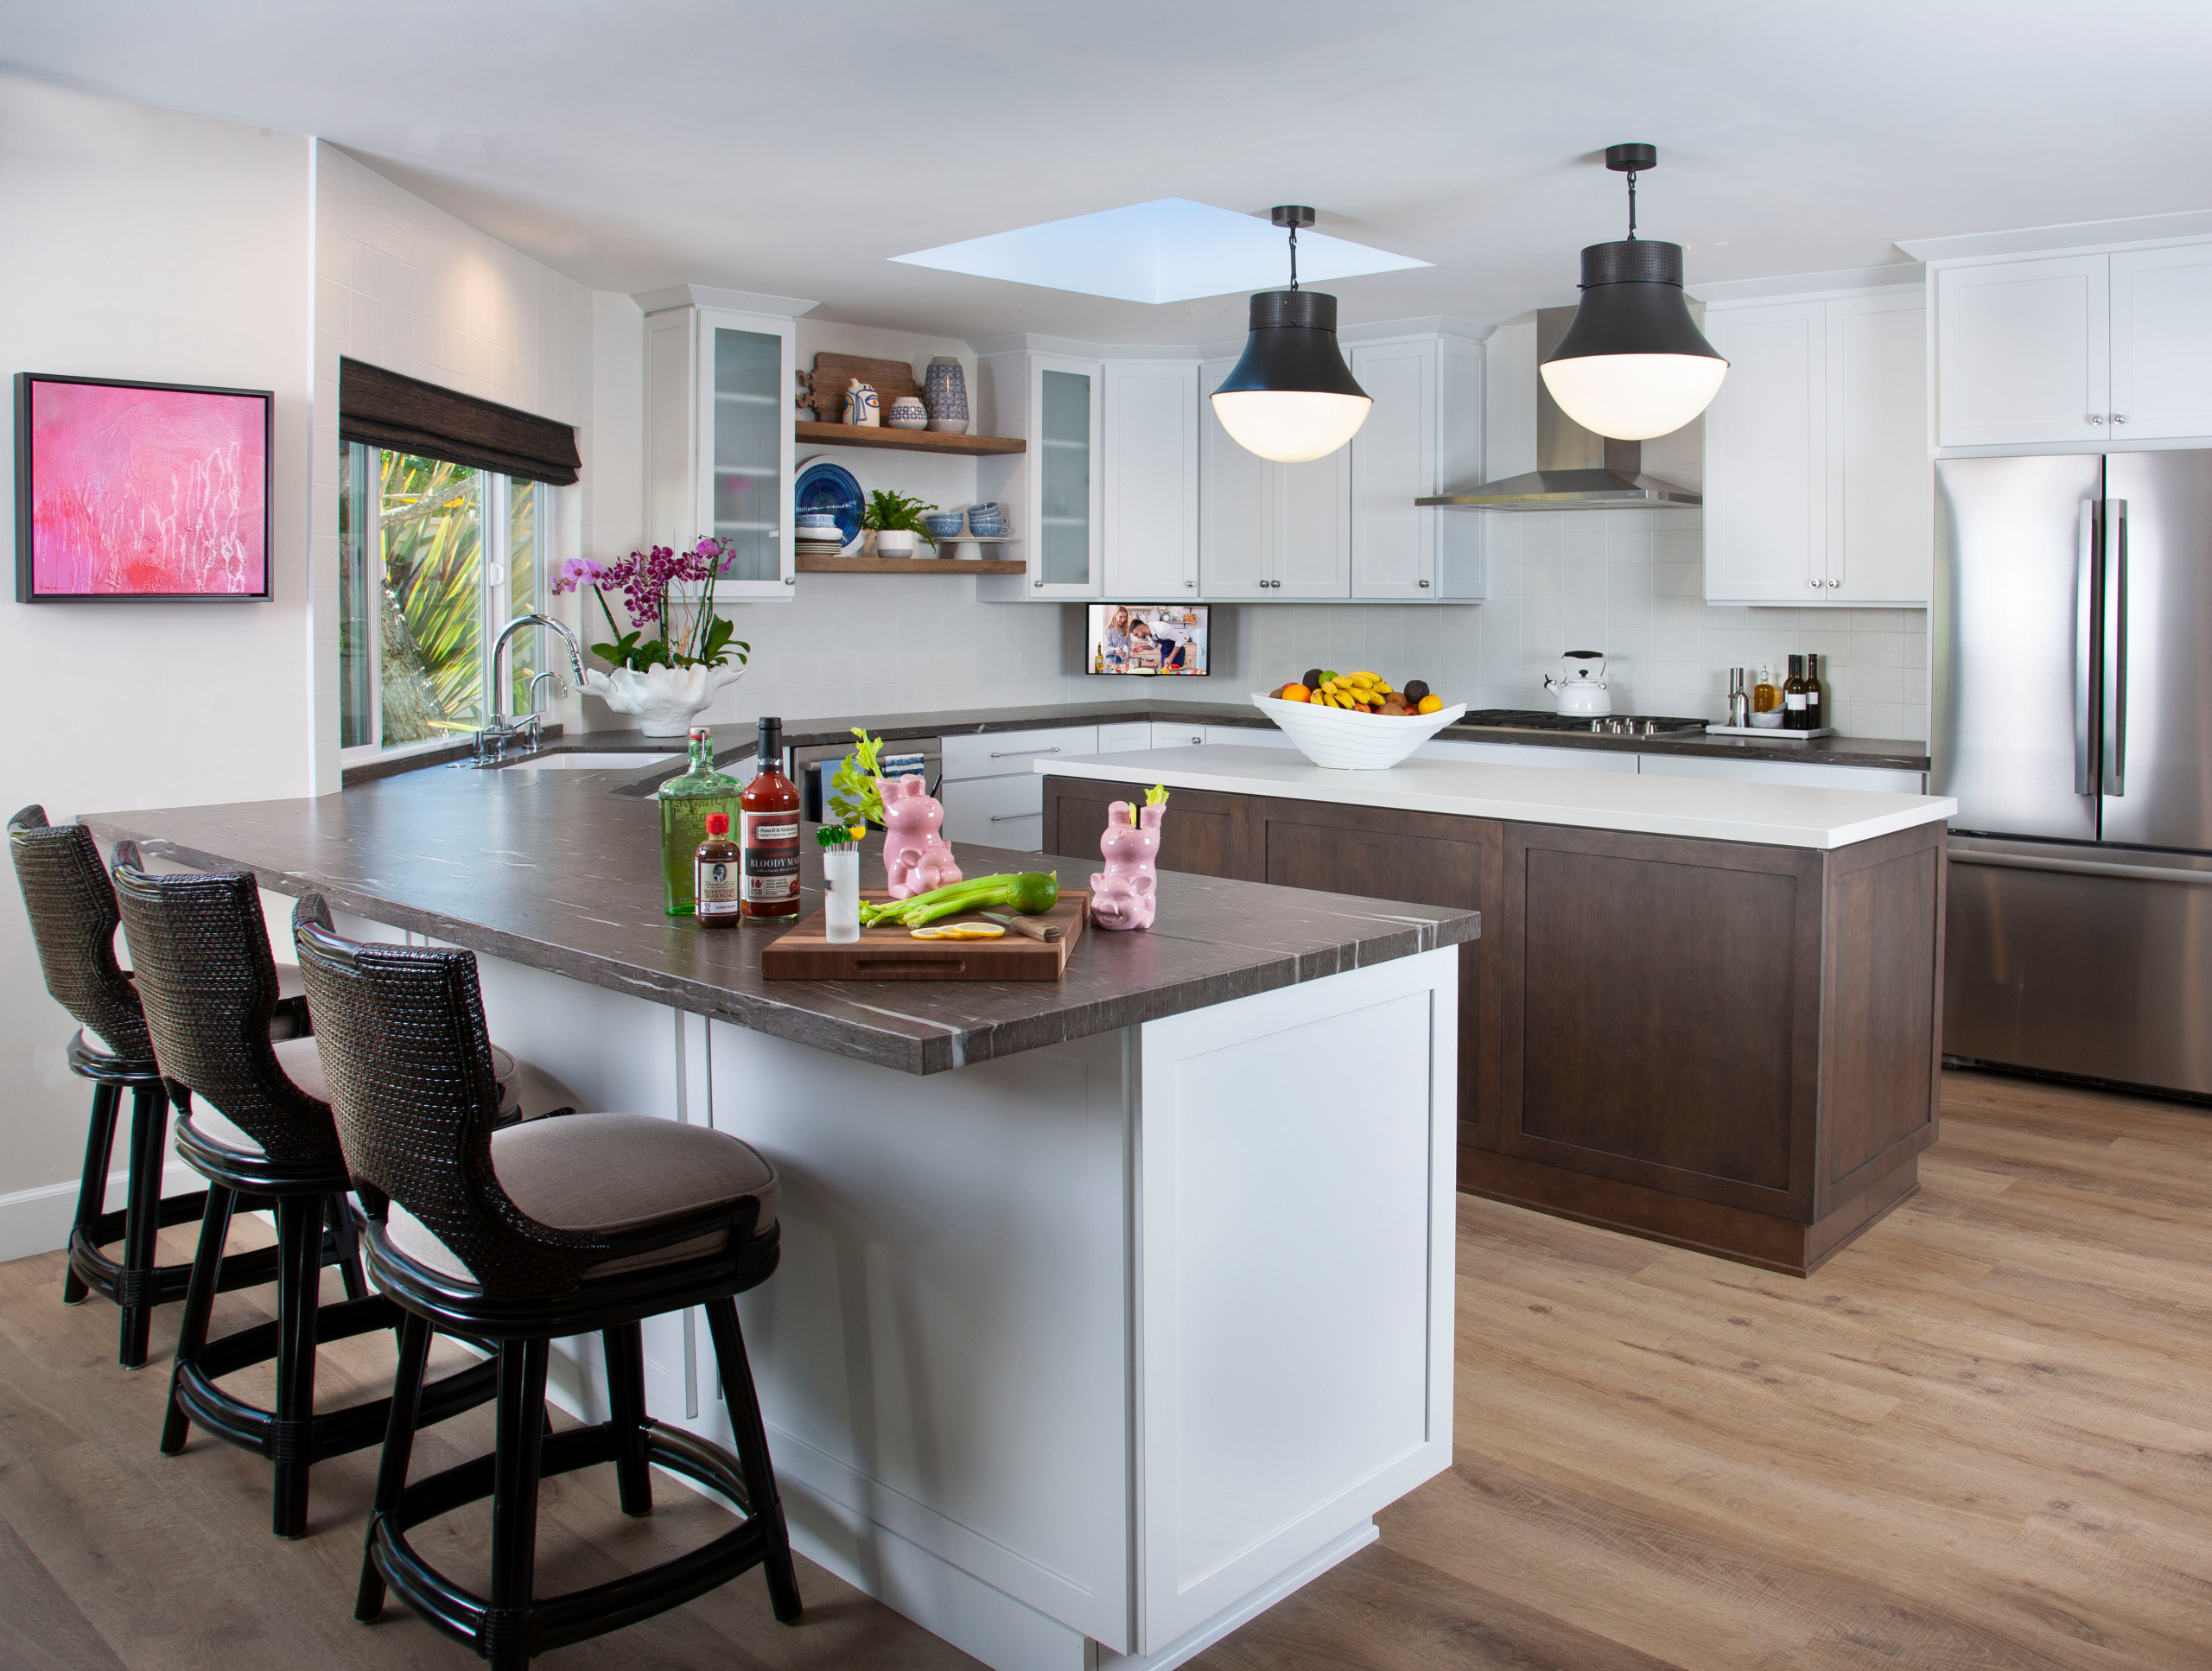 Kitchen Cabinet Colors With Light Wood Floors